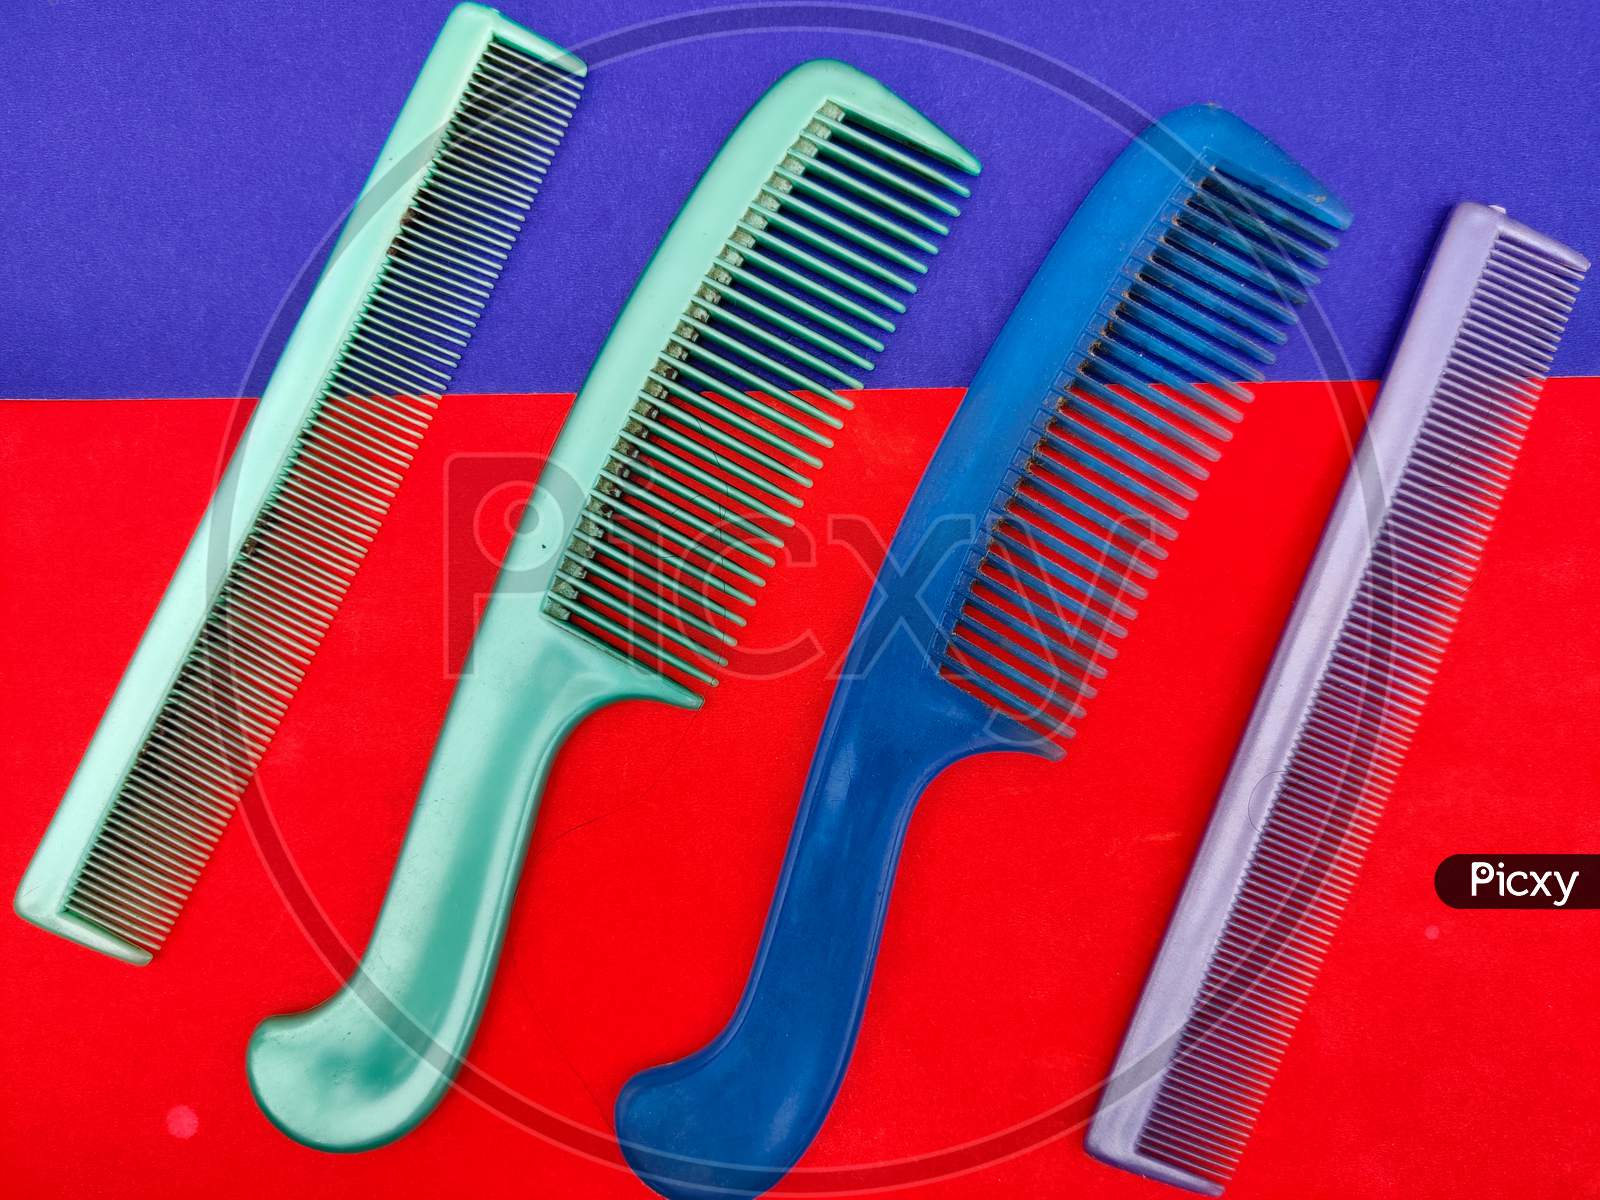 4 Colorful Used Combs Isolated On Red And Blue Background